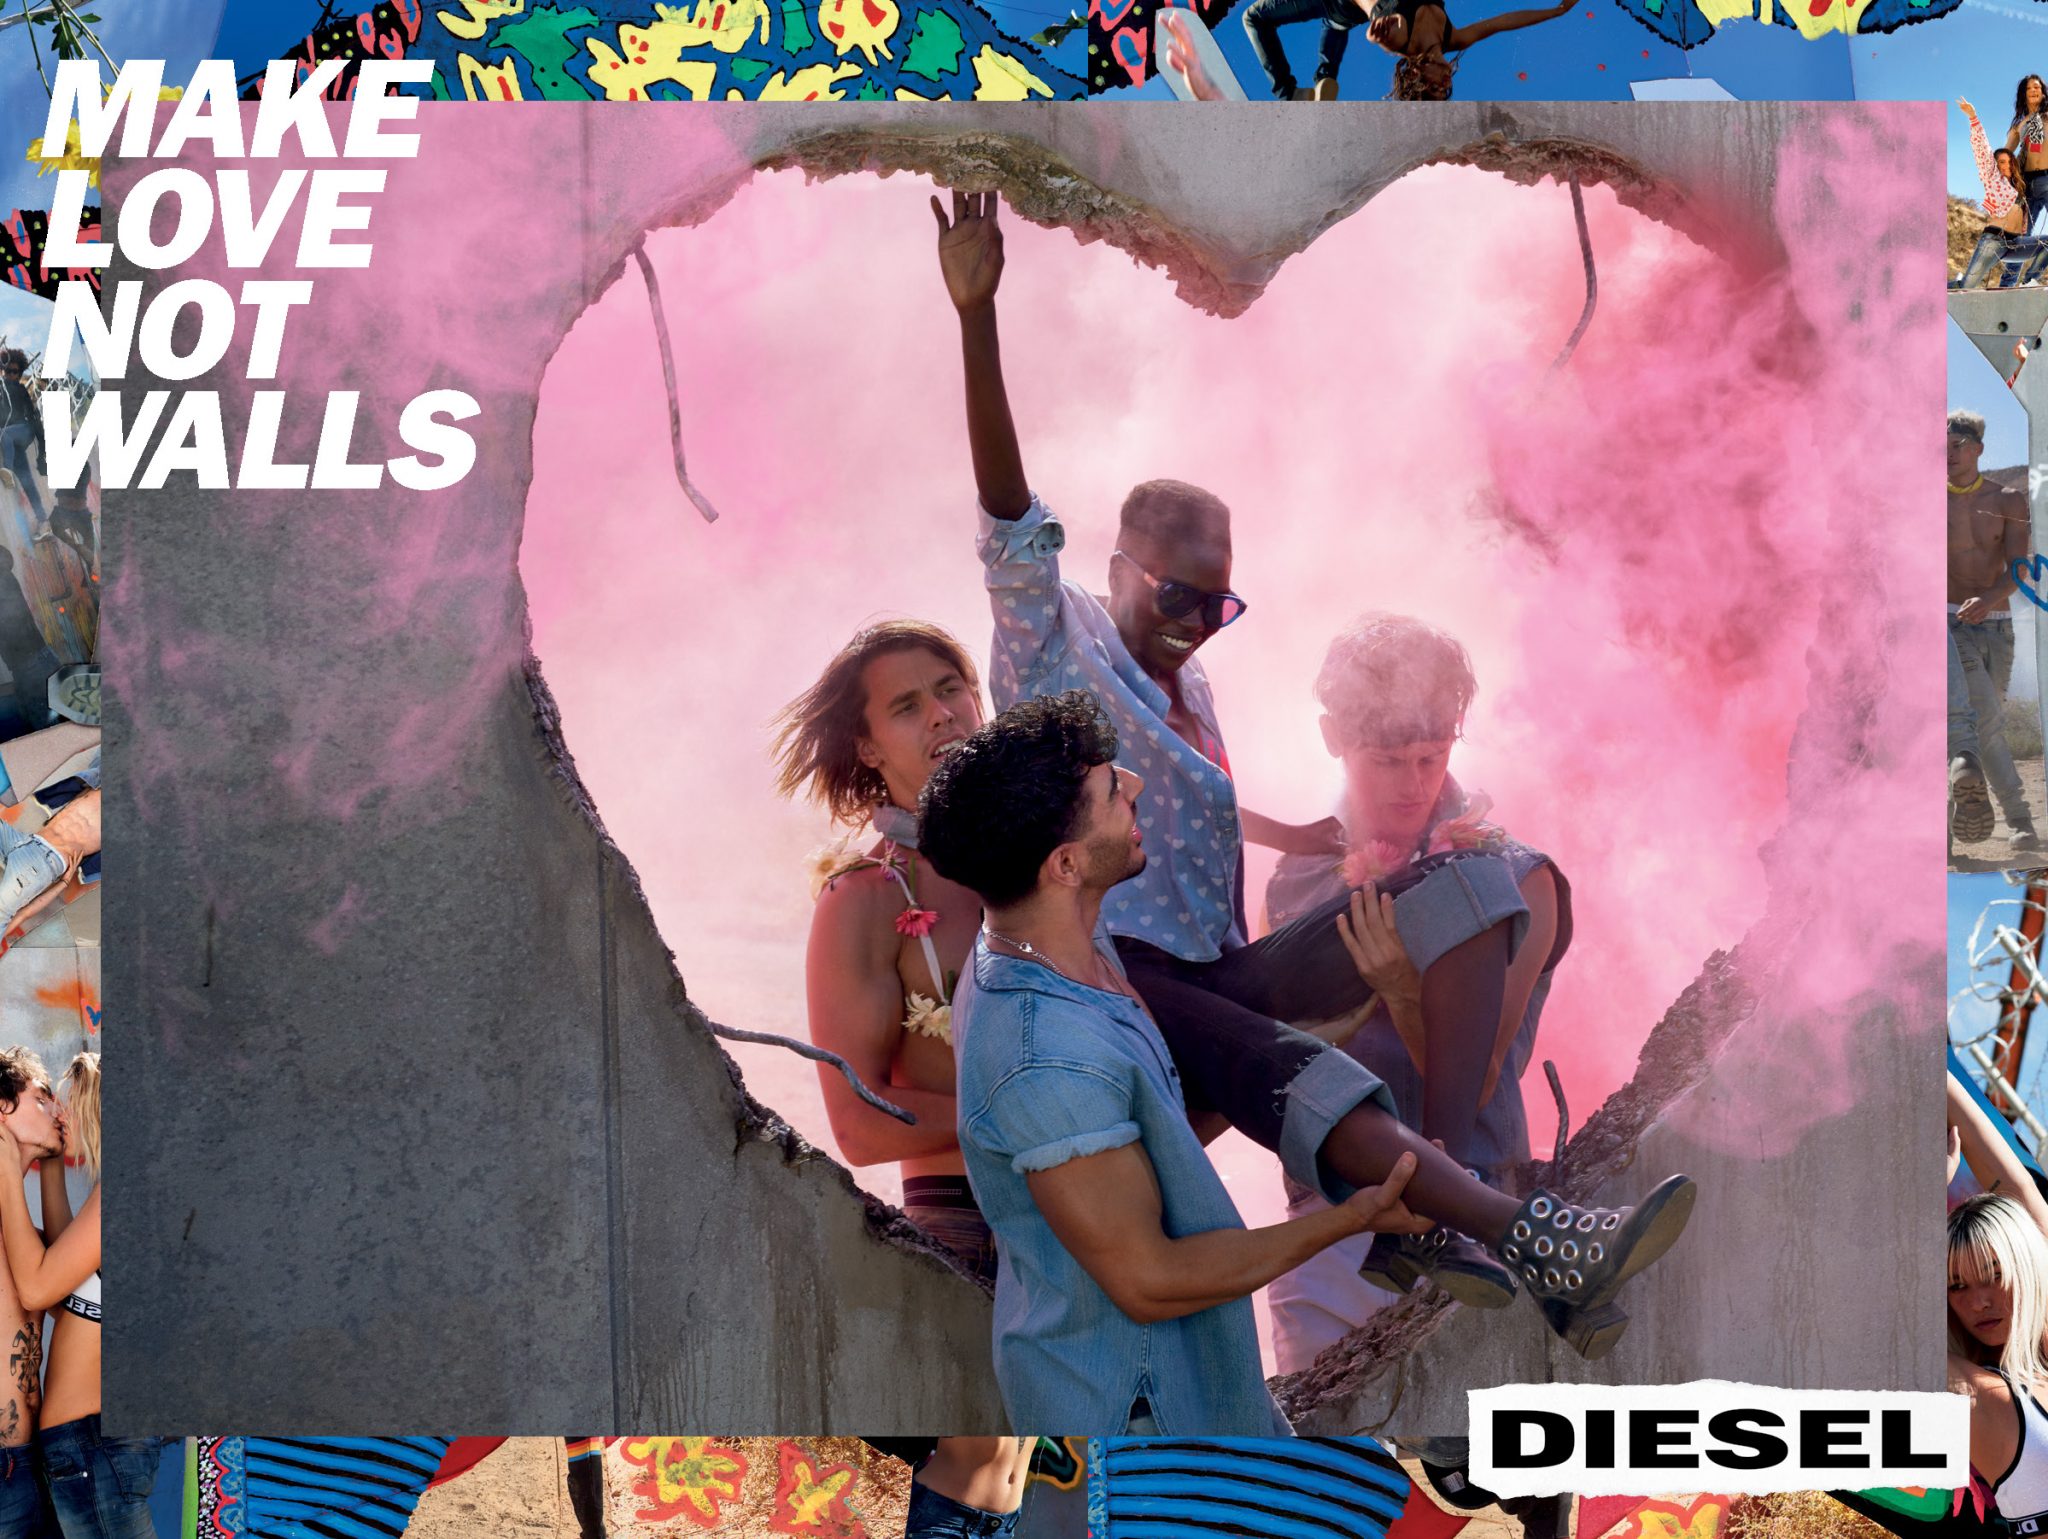 David LaChapelle | Diesel - Make love not walls | The award-winning multidisciplinary campaign launched with photography, a short film, and installations that traveled around the globe, putting forward a timely message that pays tribute to inclusion, love, diversity, and fraternity.
| 13